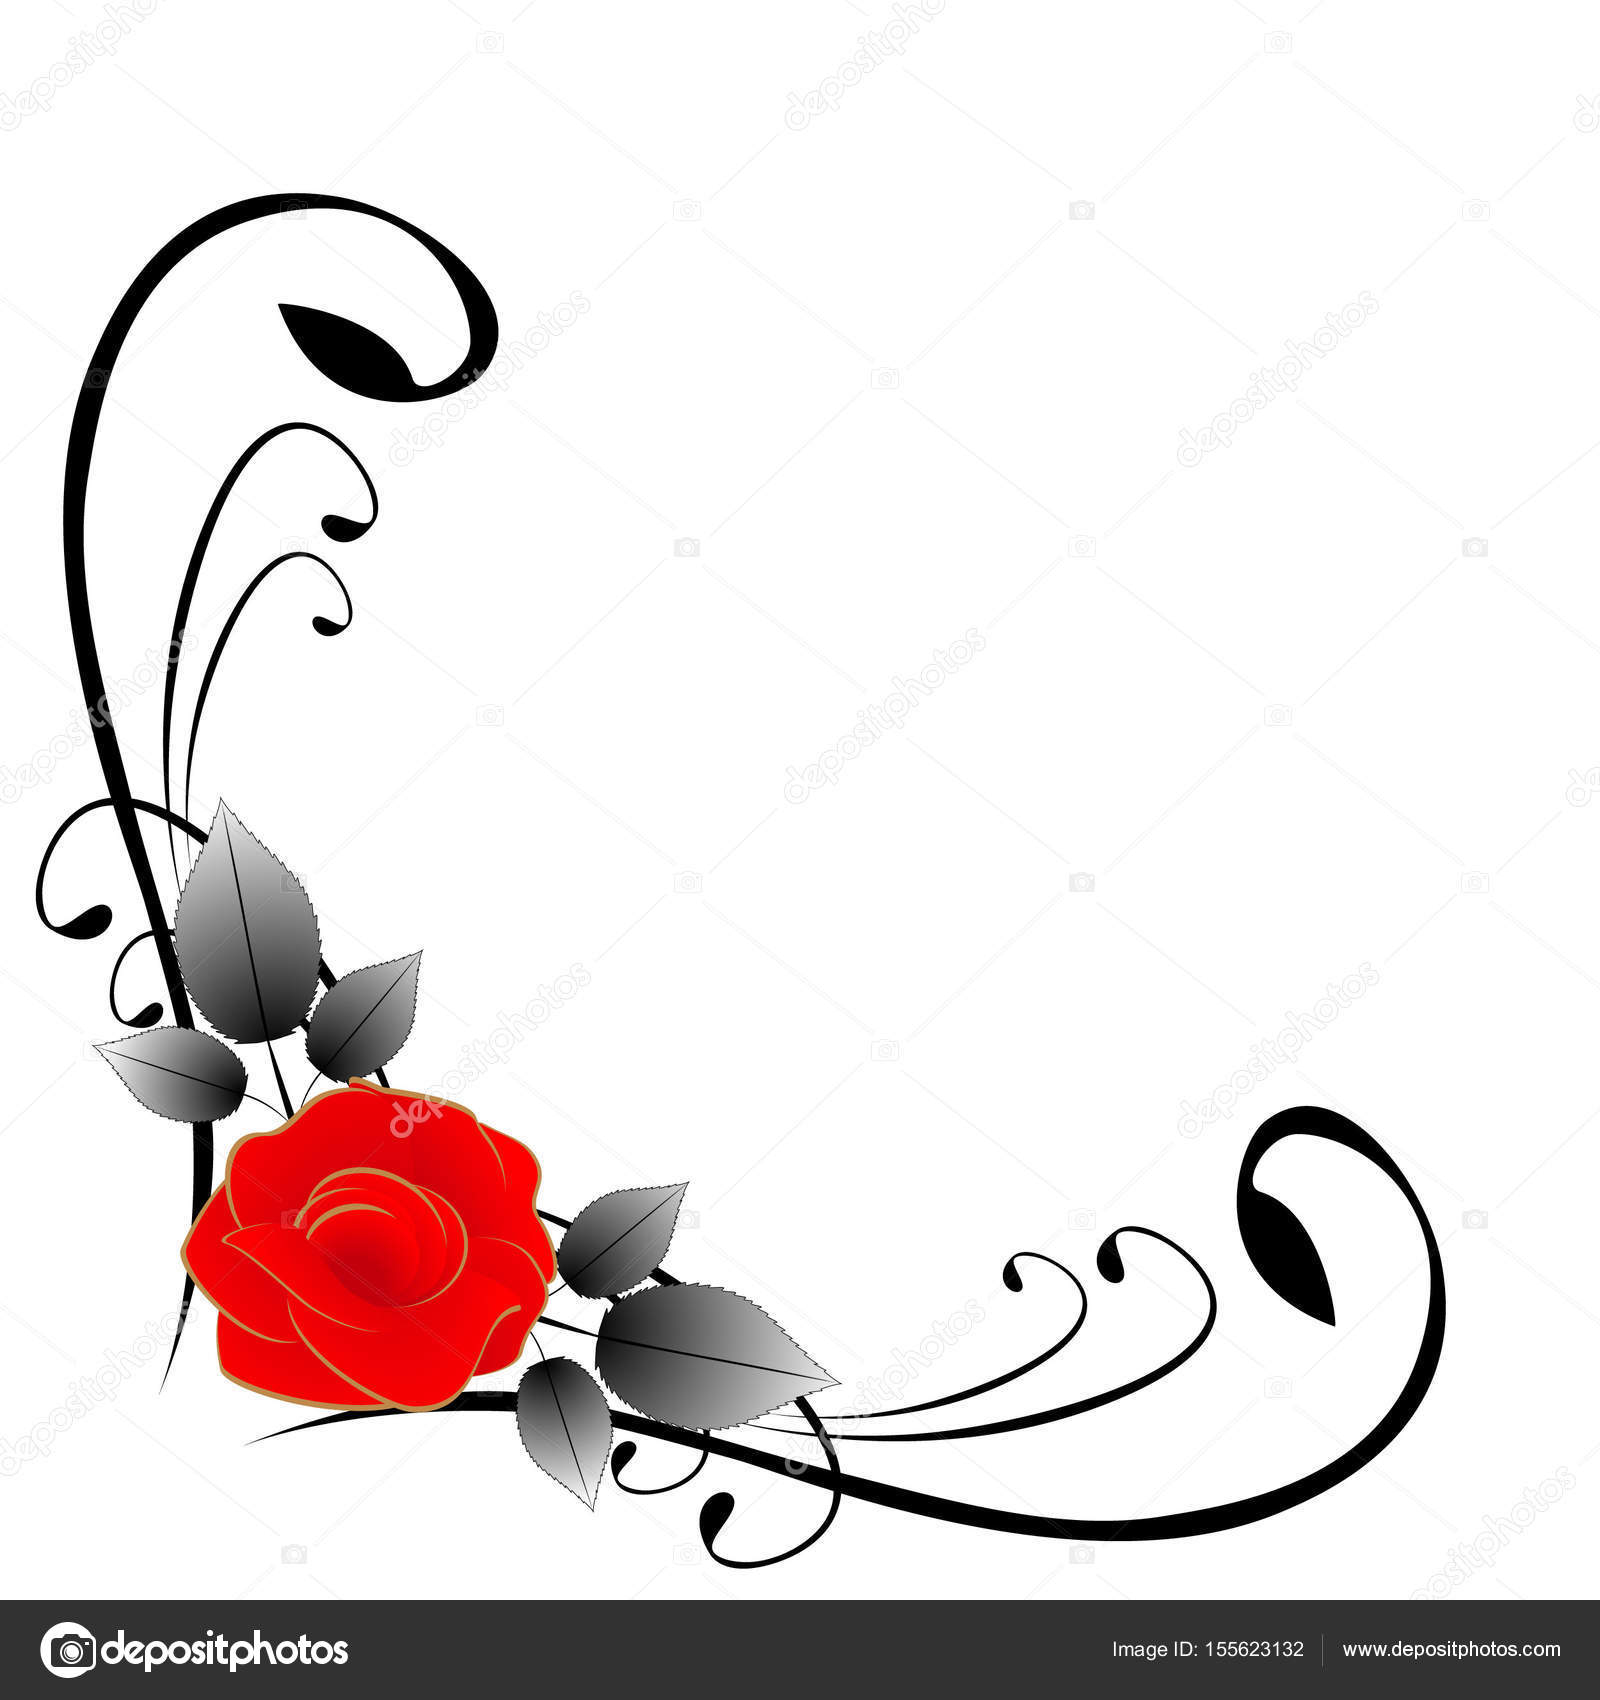 Corner composition with red rose and leaves, illustration isolated on ...